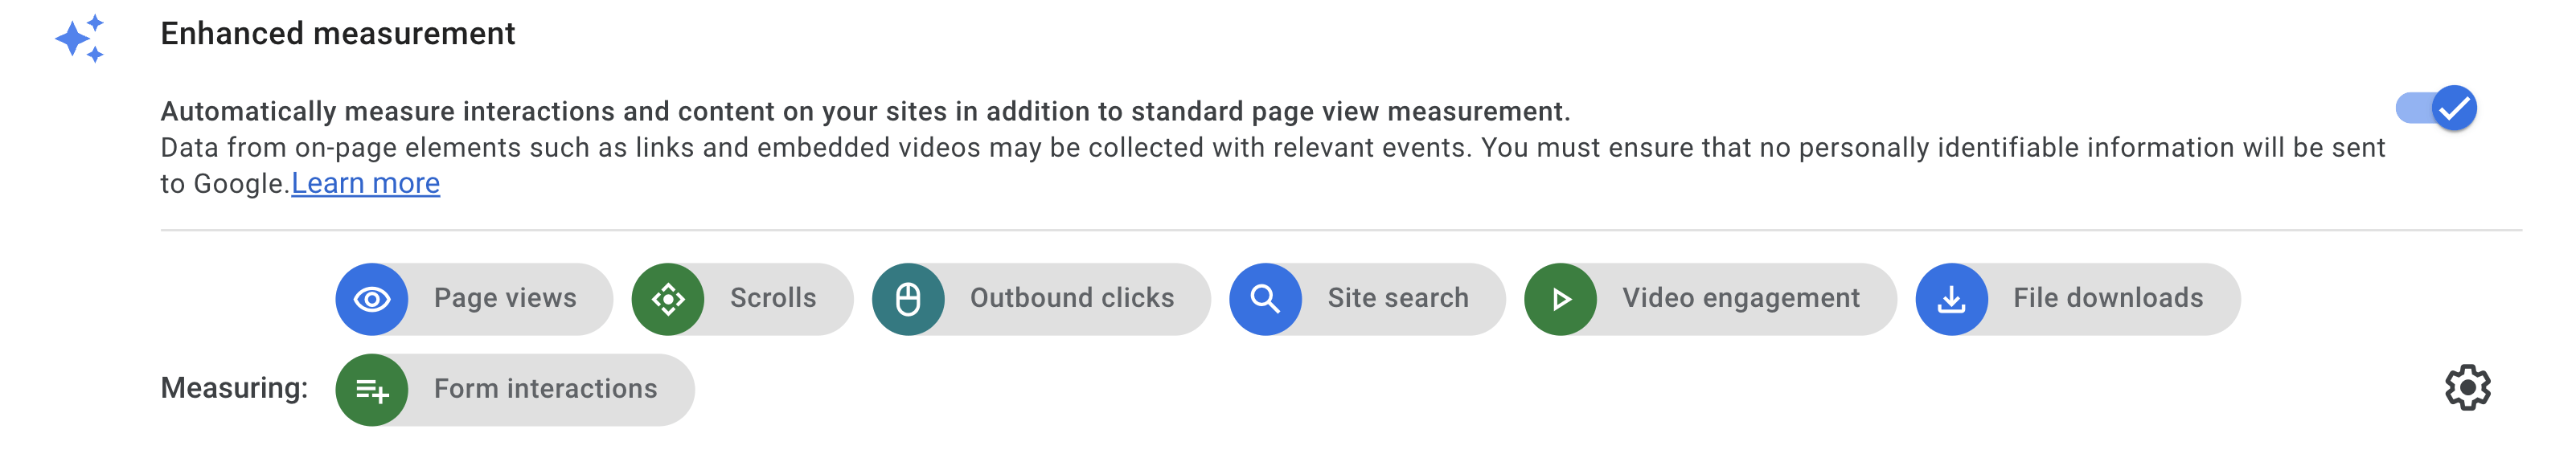 Active GA4 enhanced measurement events while creating your data stream. Enhanced measurement lets you measure interactions with your content by enabling options (events) in the Google Analytics interface